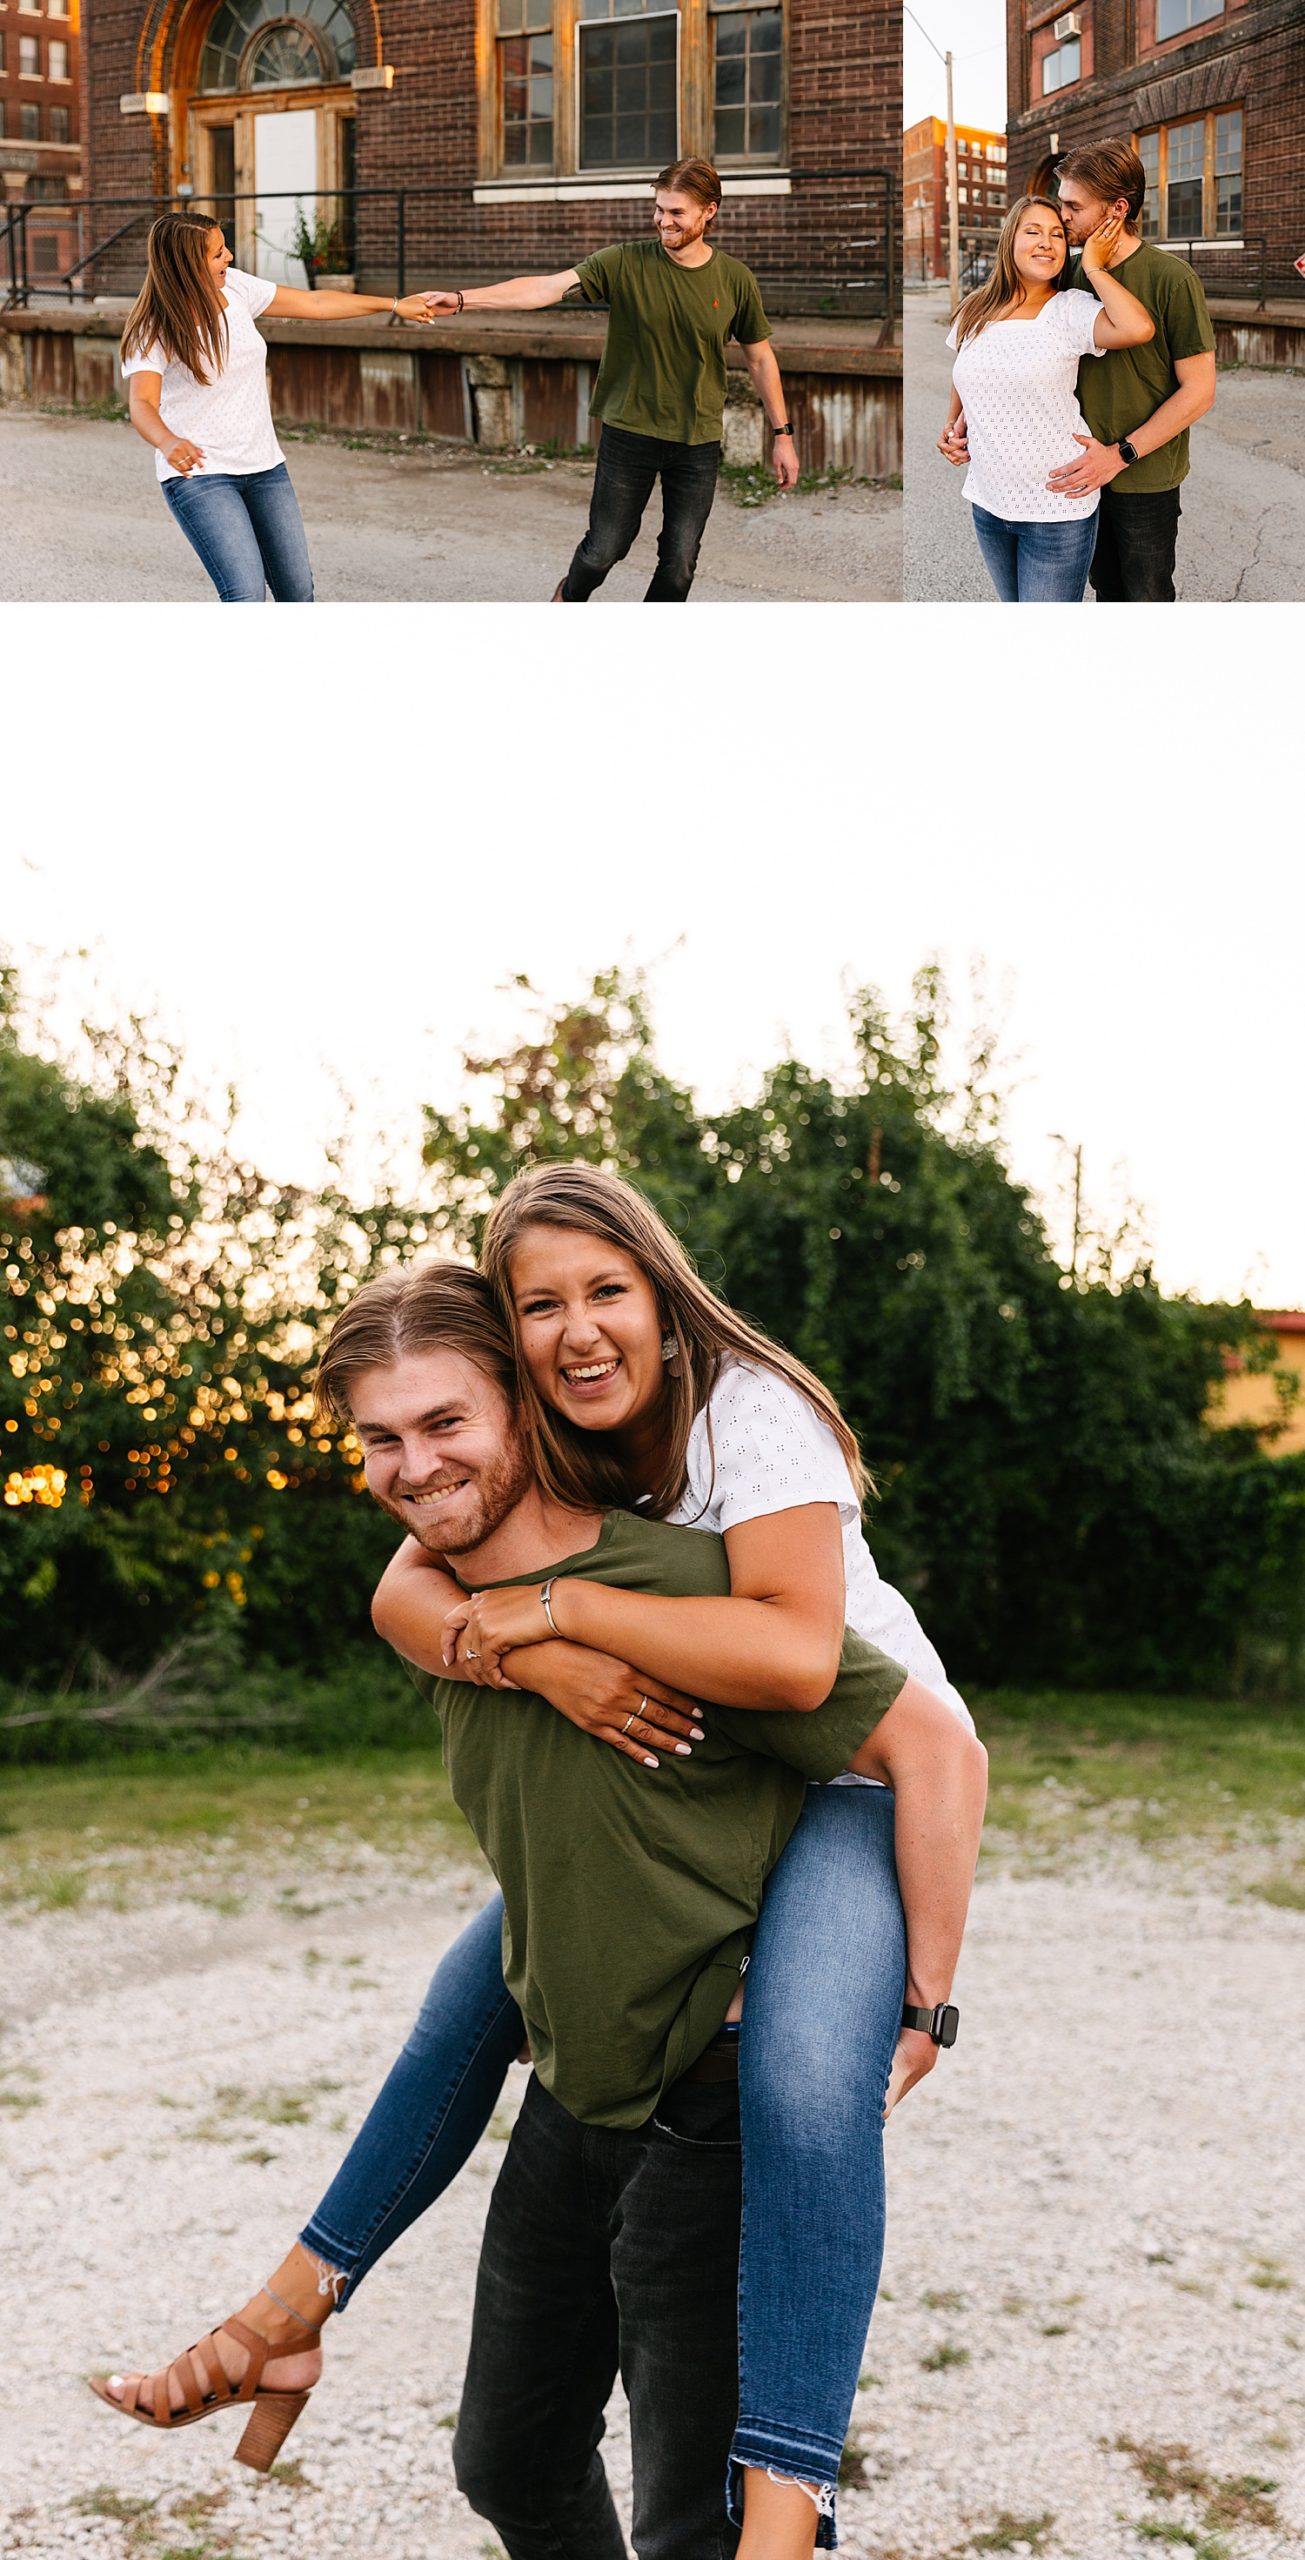 Piggy back ride with engage couple during sunset in Kansas City